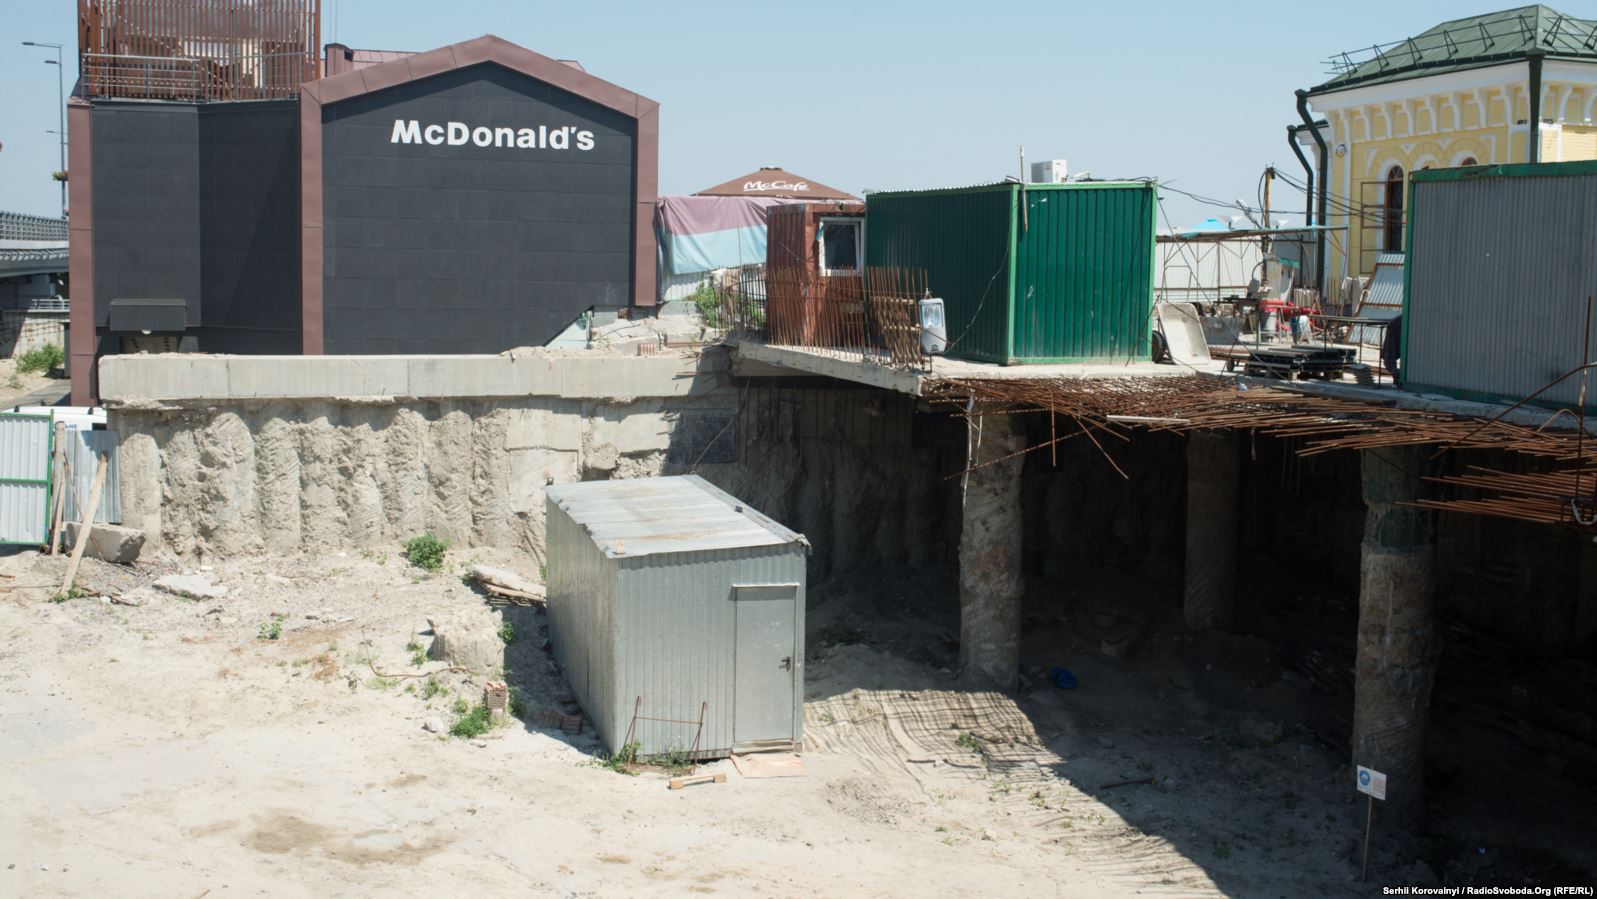 The entrance to the excavation site is located right behind the Church of the Nativity of Christ and near a McDonald's